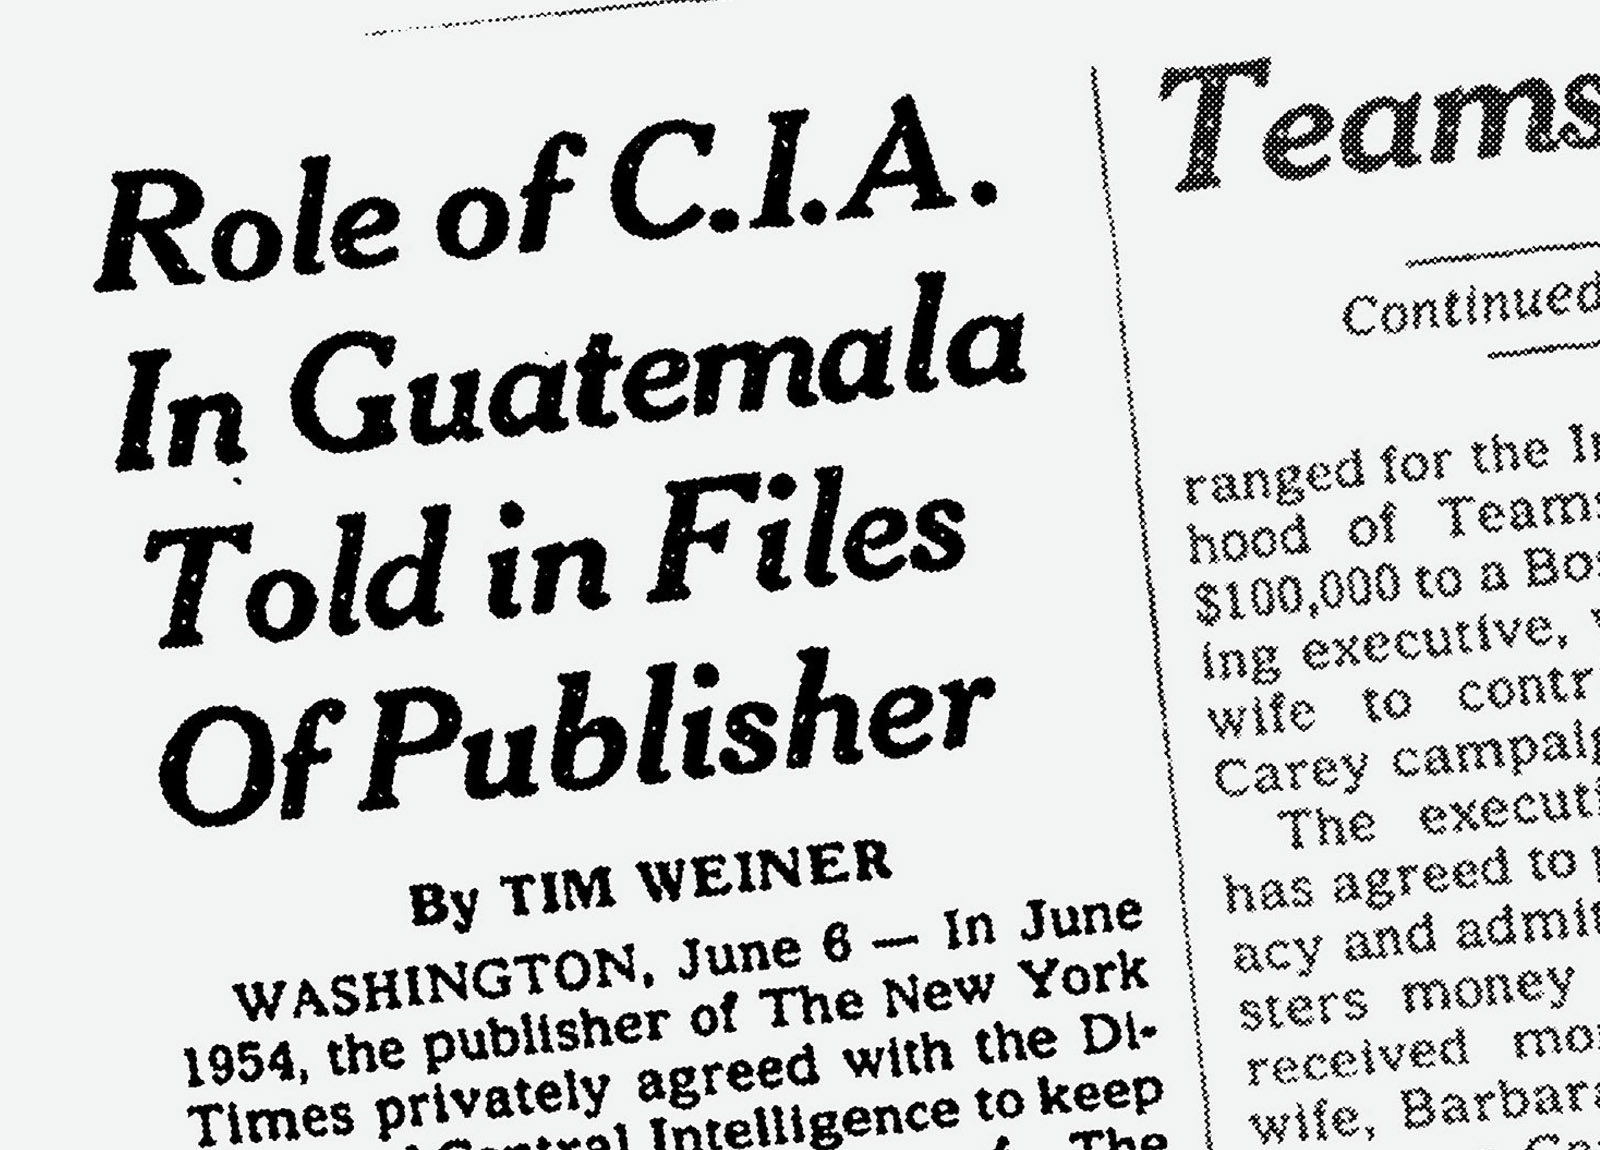 Illustration:
A New York Times article, from 1954, is blown up so that it extends beyond the edges of the frame. The headline reads: “Role of CIA in Guatemala Told in Files Of Publisher.”